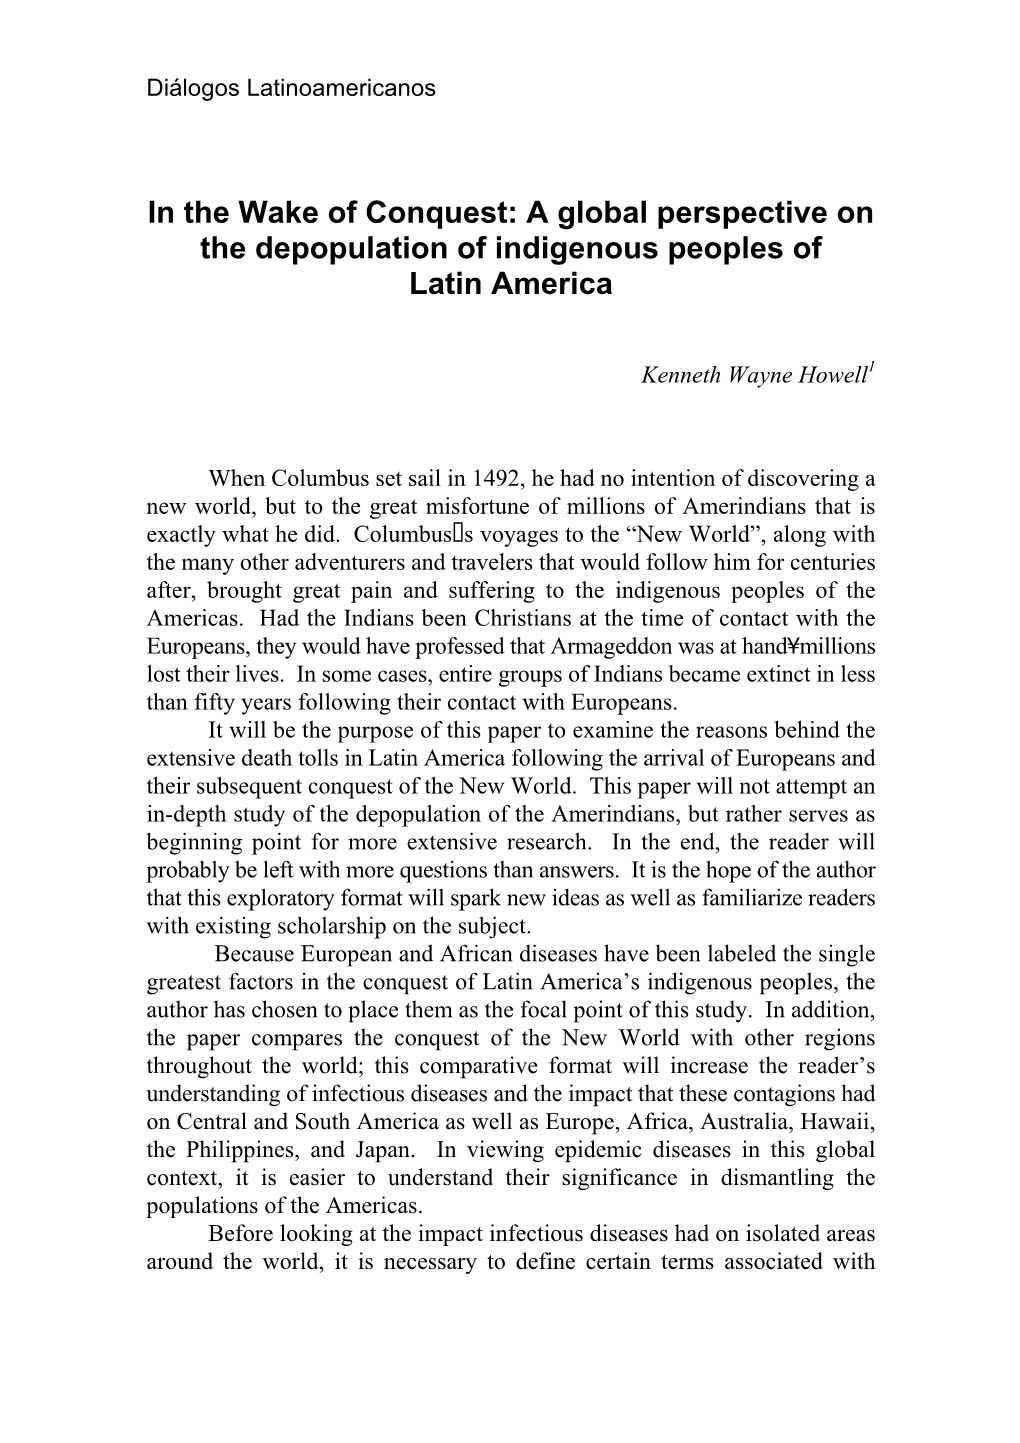 In the Wake of Conquest: a Global Perspective on the Depopulation of Indigenous Peoples of Latin America